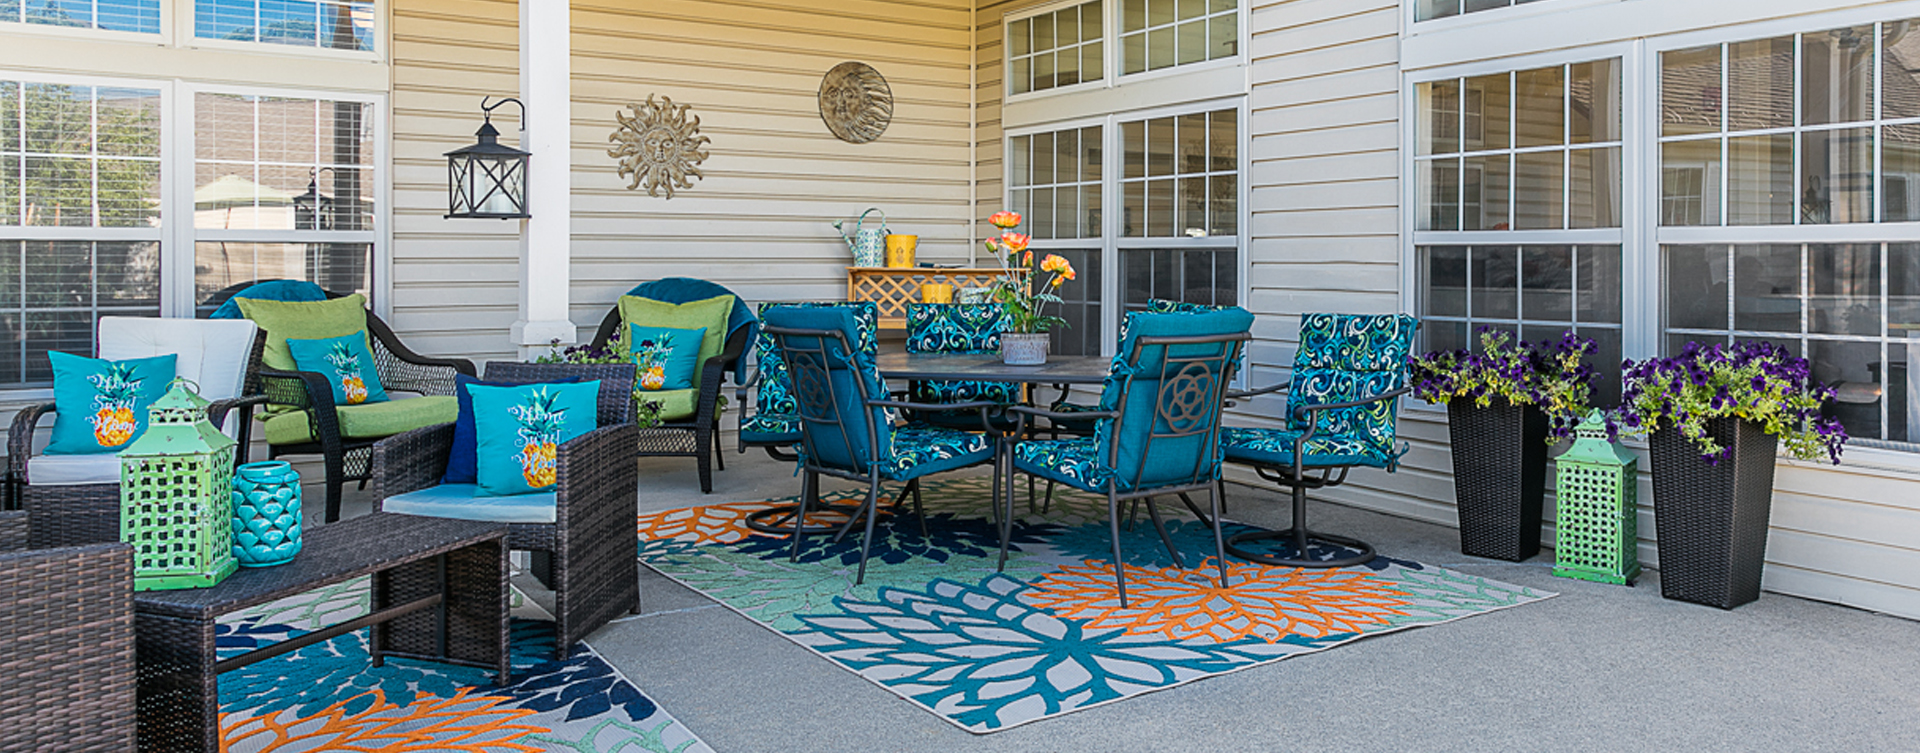 Feel like you’re on your own back porch in our courtyard at Bickford of Marshalltown